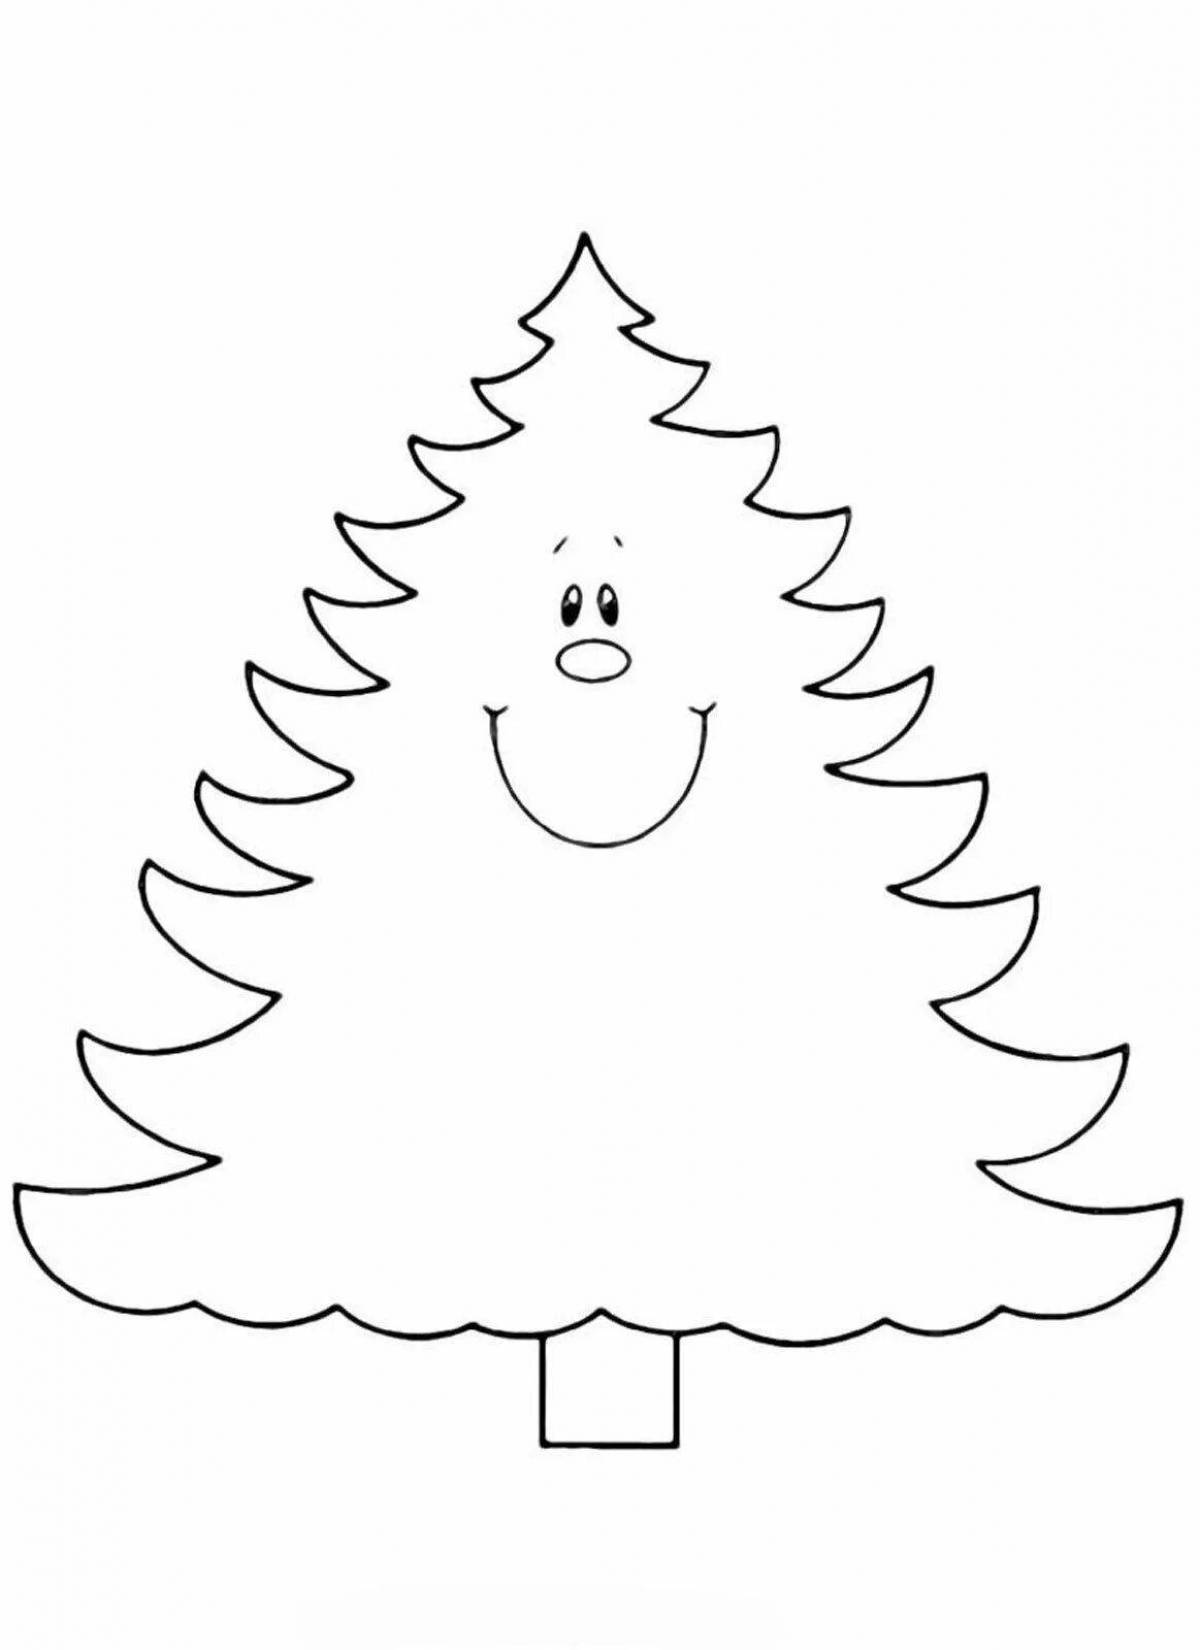 Amazing Christmas tree coloring book for kids